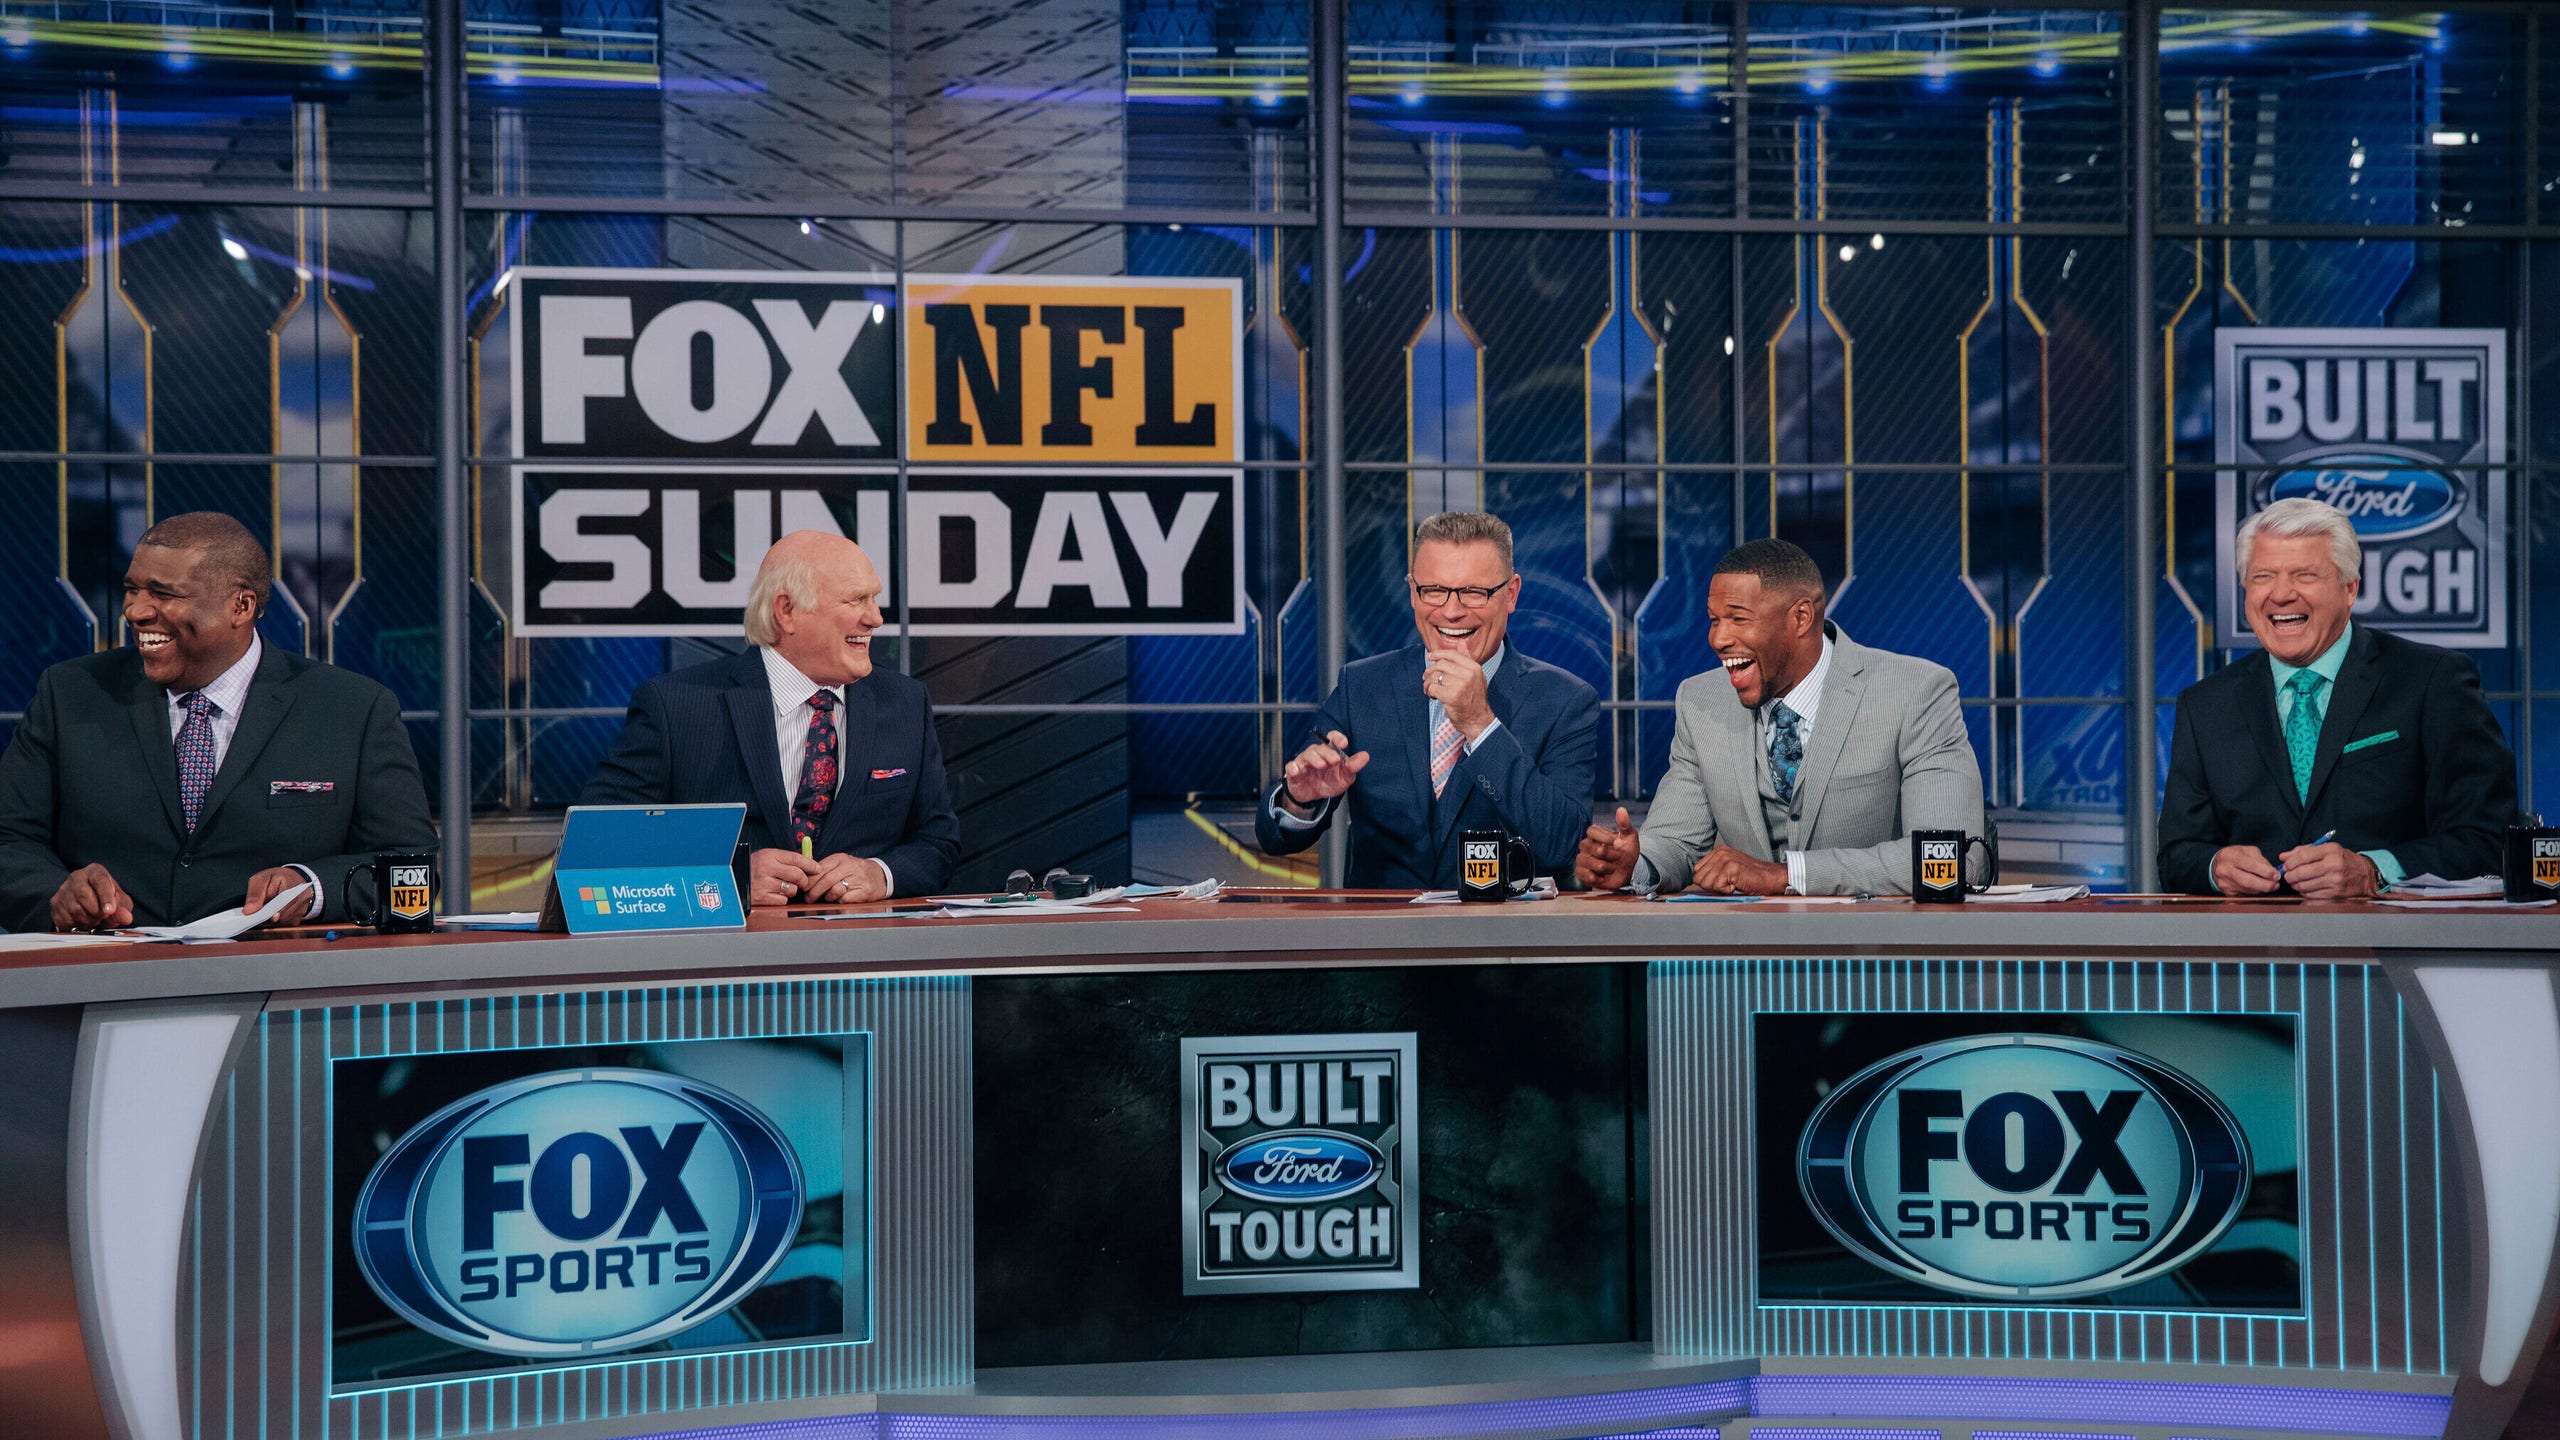 Fox's NFL pregame show takes place in broadcast Hall of Fame FOX Sports